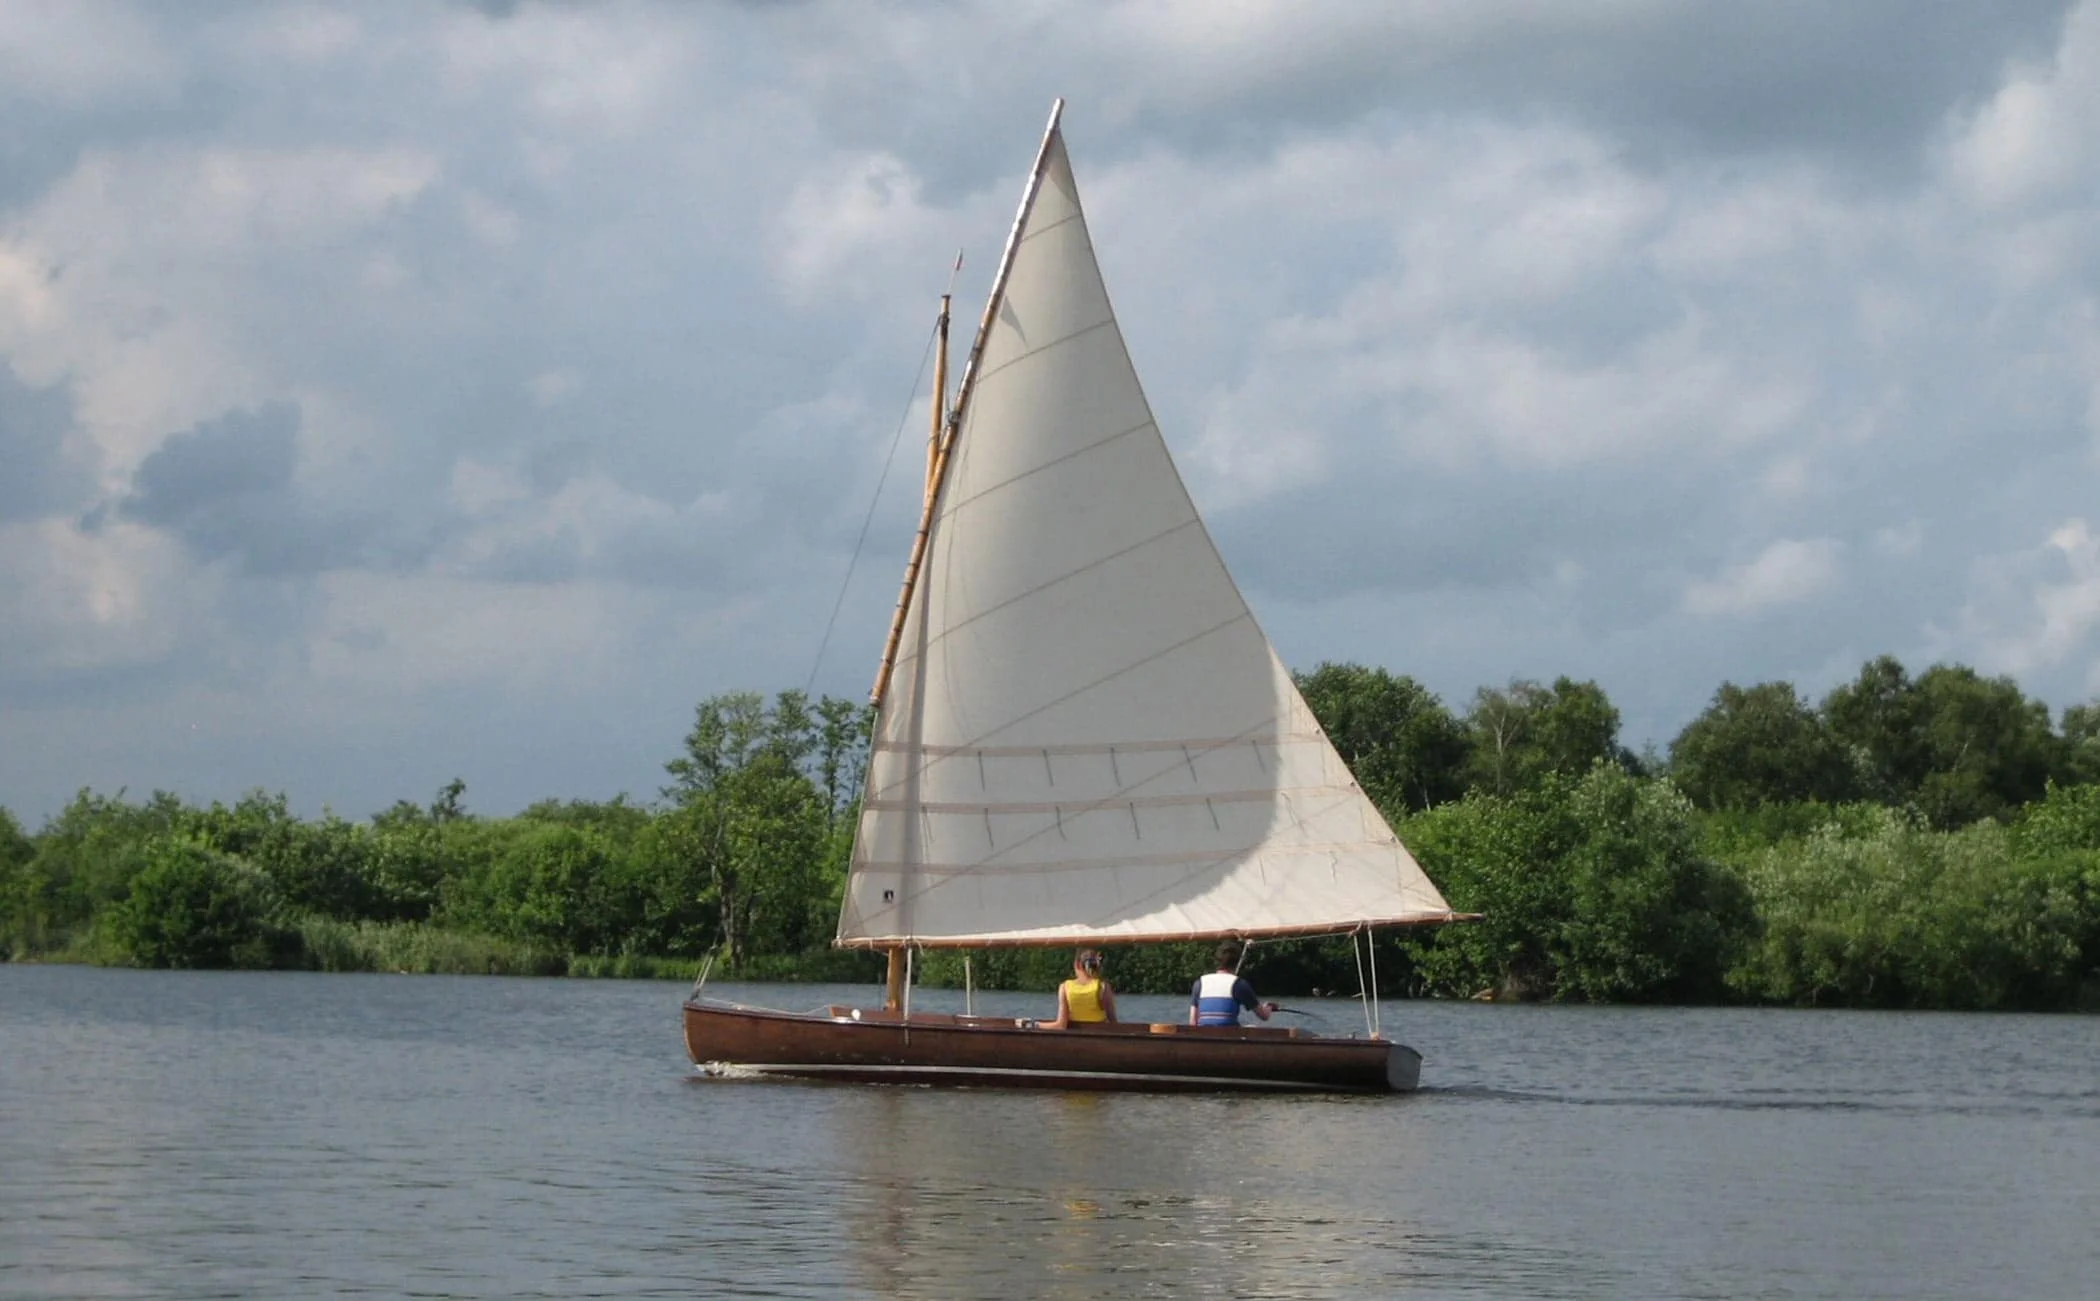 A traditional wooden half-decker, the Woodcut sails the Norfolk Broads